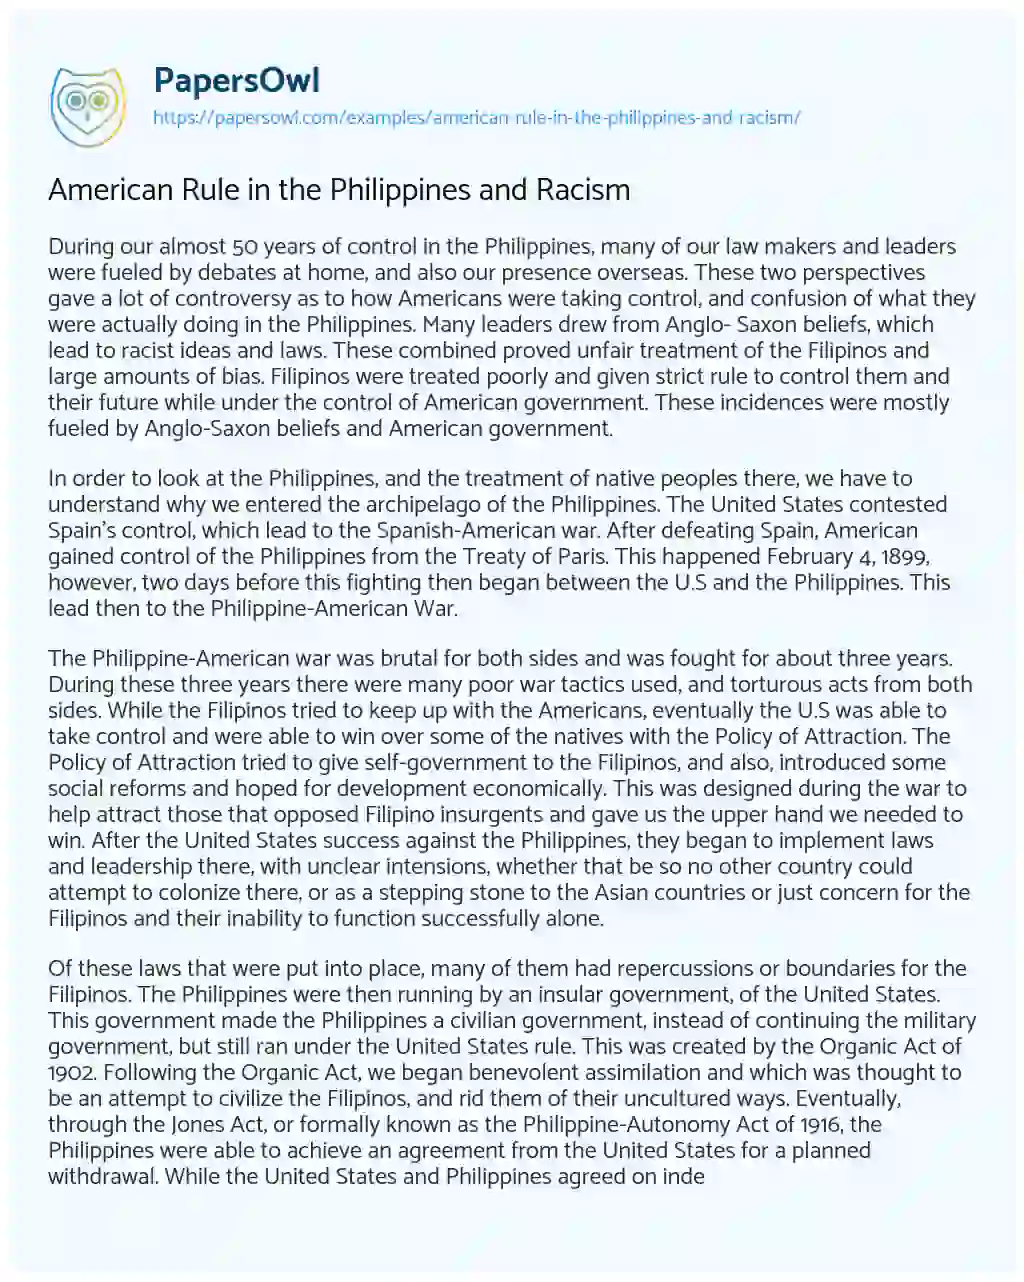 American Rule in the Philippines and Racism essay